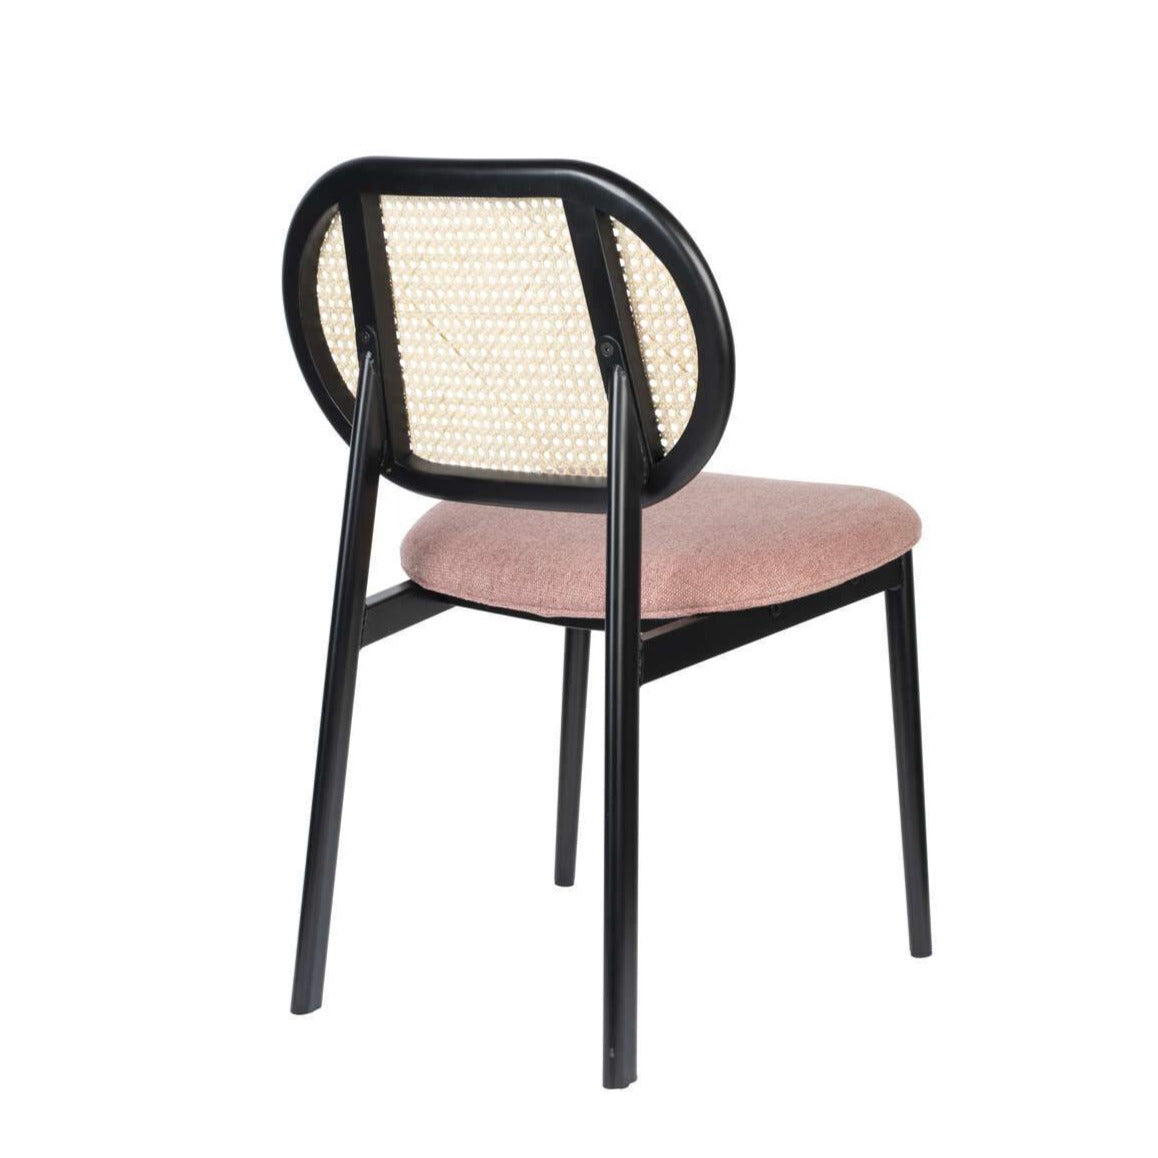 SPIKE chair pink with rattan backrest, Zuiver, Eye on Design